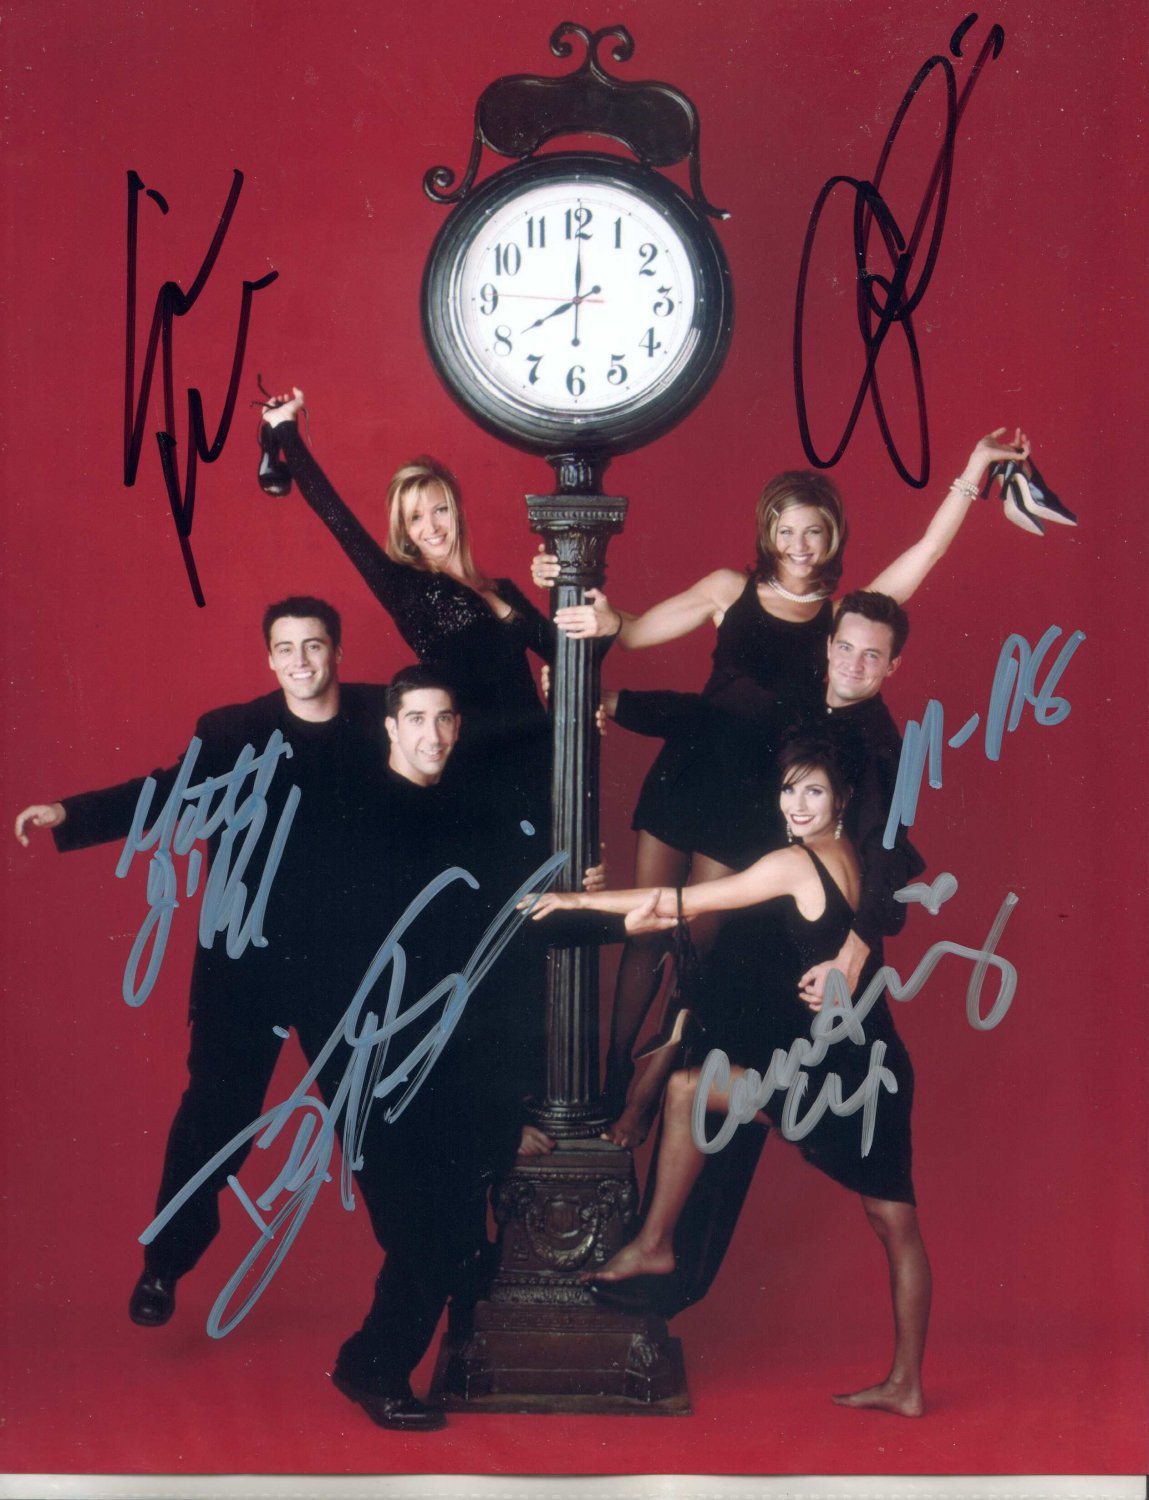 FRIENDS TV CAST - ALL -=6=- ORIGINAL SHOW MEMBERS - AMAZING HAND SIGNED AUTOGRAPHED PHOTO WITH COA